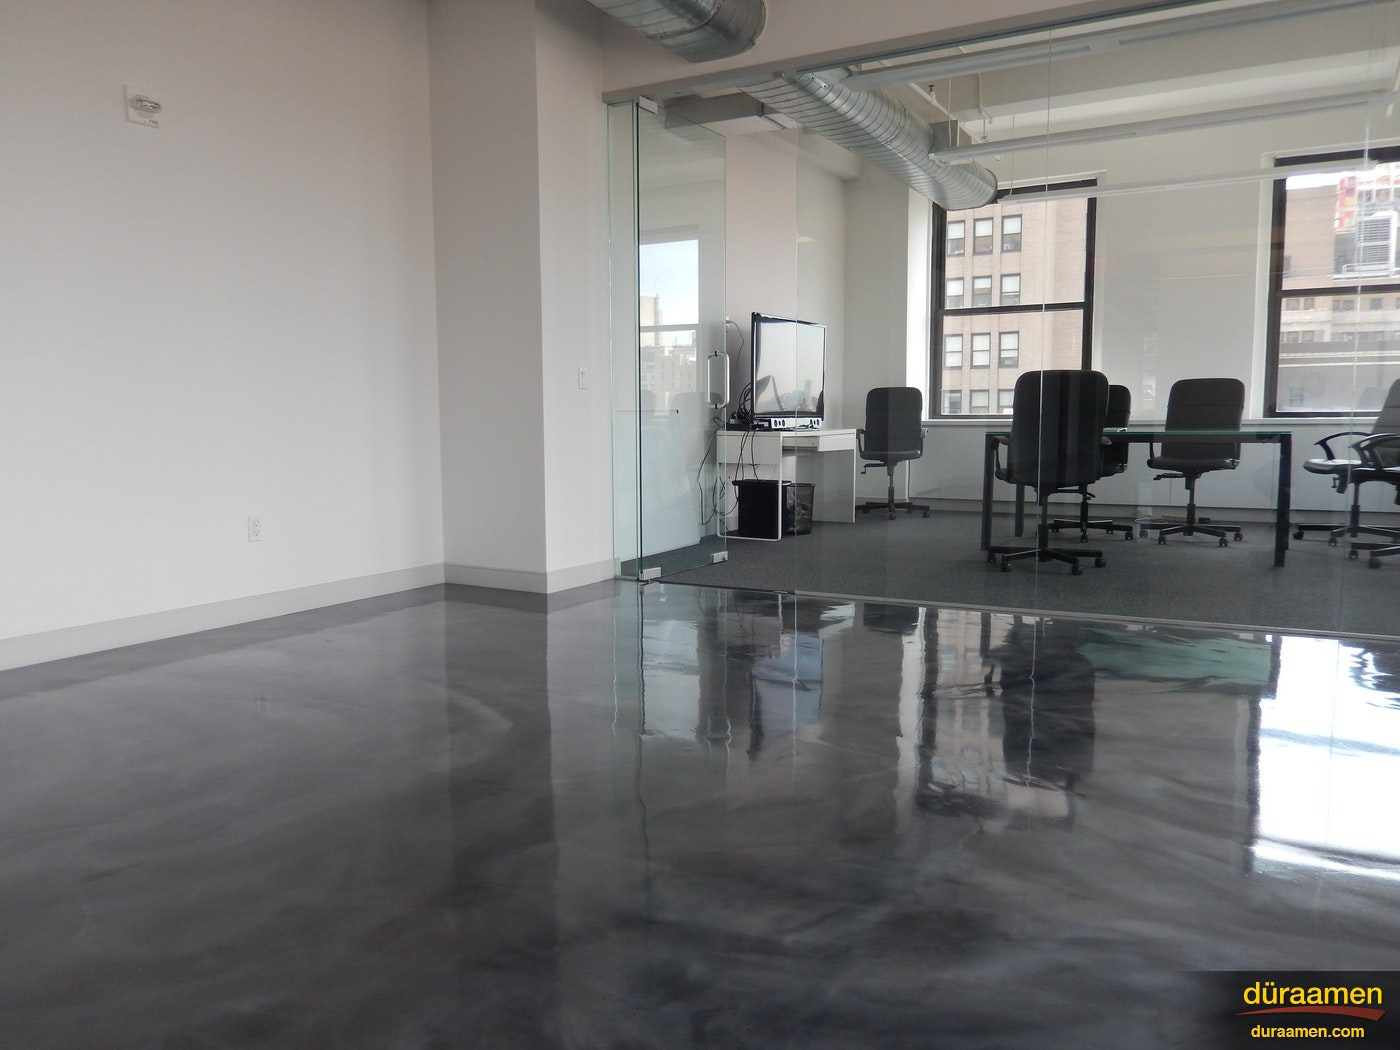 ts unique and high end look is the perfect solution for this NYC high rise Metallic Epoxy flooring in a Office on 7th Avenue in NYC | Duraamen Engineered Products Inc